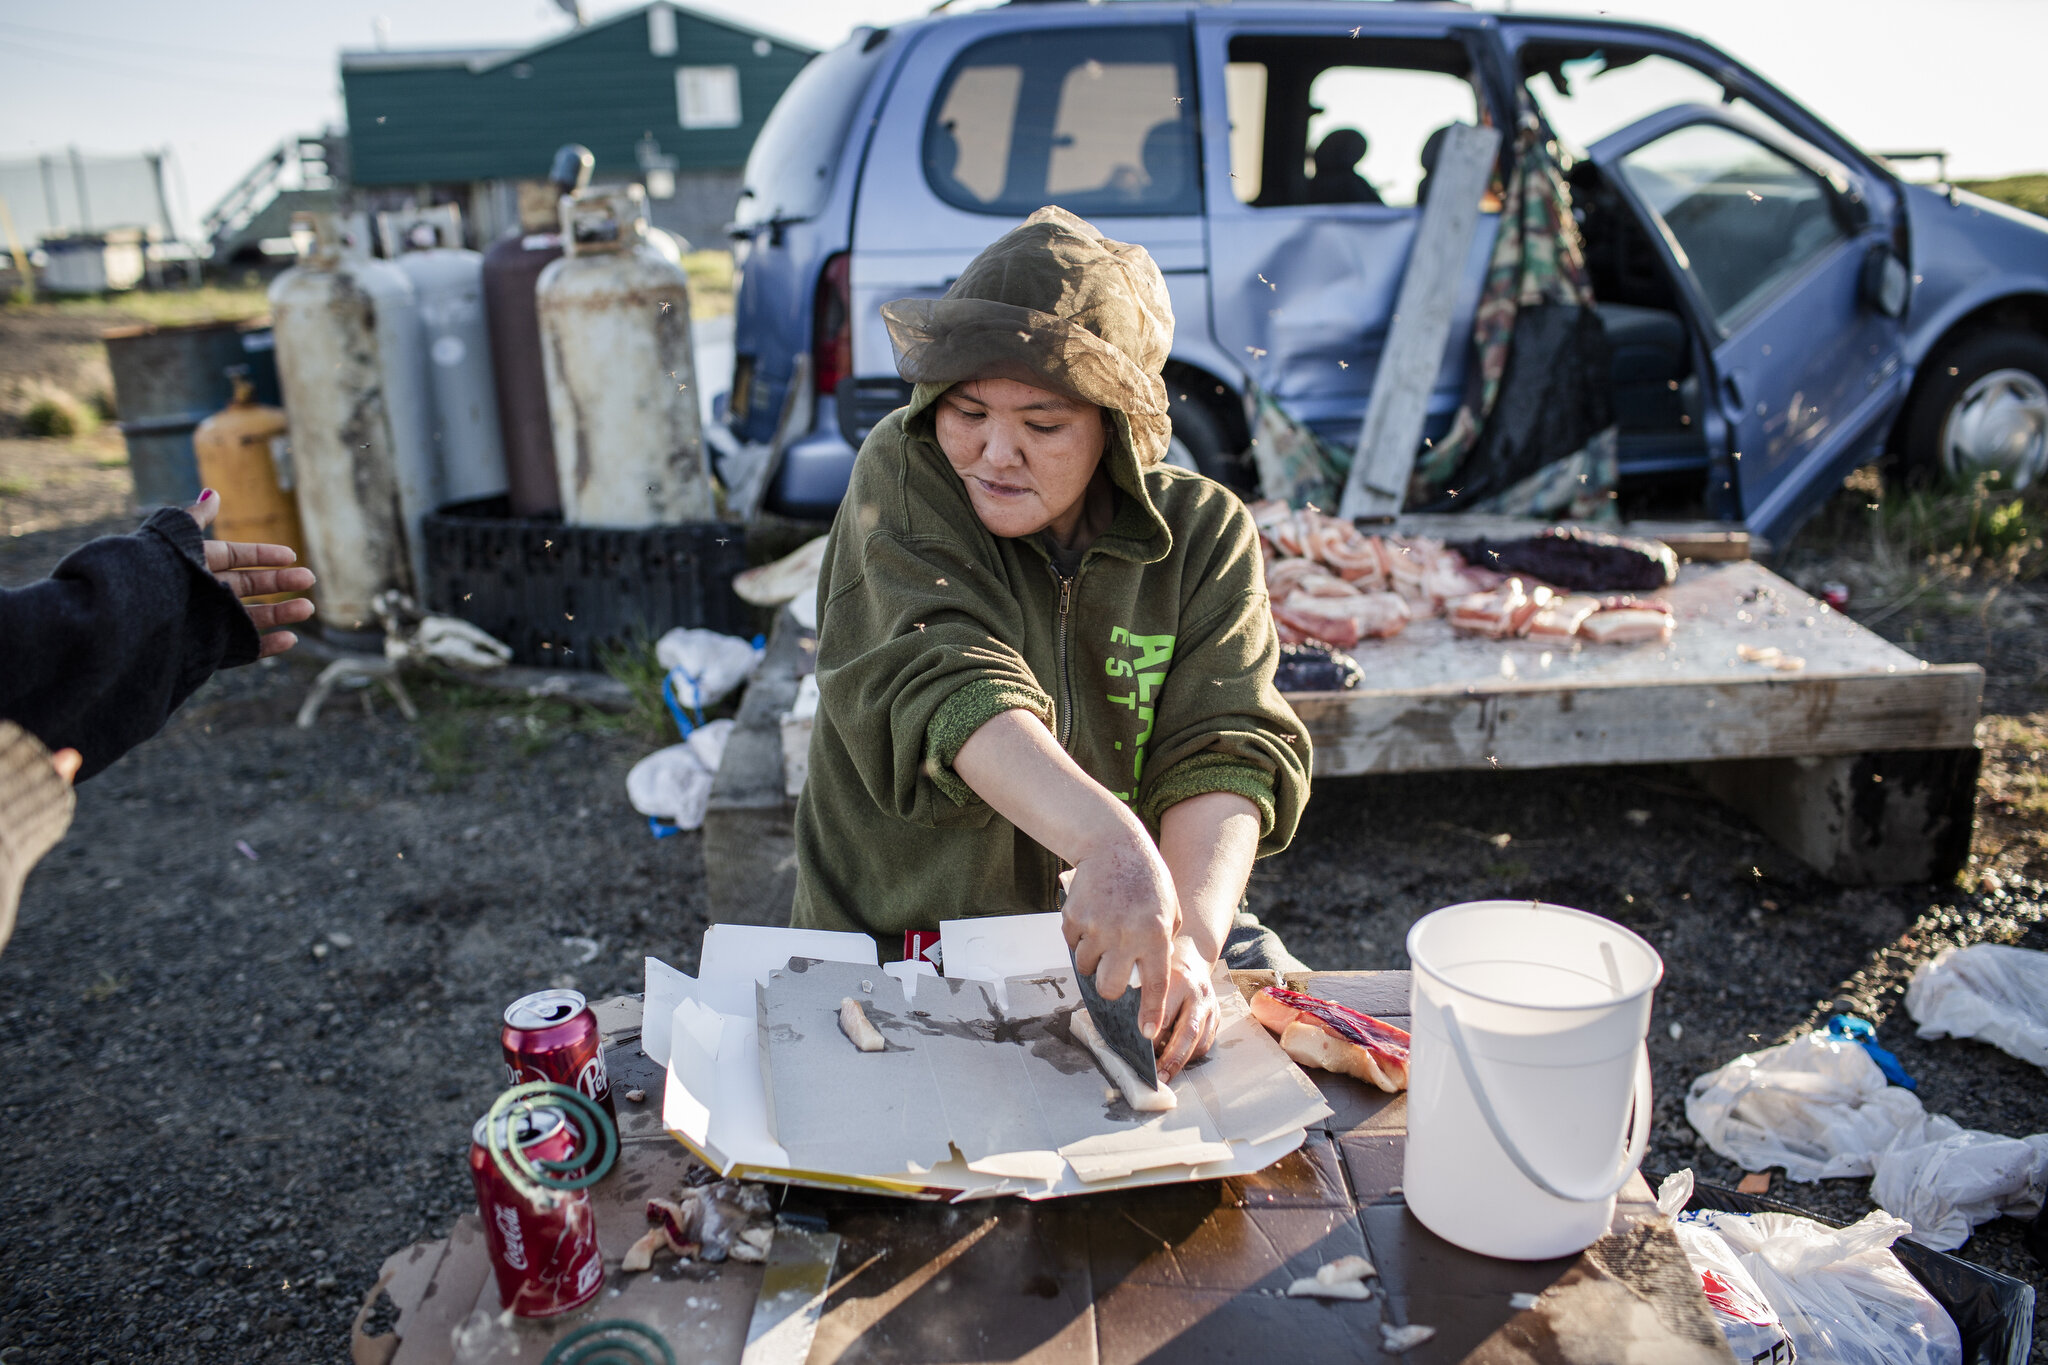  A woman processes beluga whale after days of harvesting the food source in Point Lay, Alaska, a tiny, isolated Inupiat village with a population of roughly 250 people located along the Chukchi Sea. June 23rd, 2015. Point Lay has become well known as